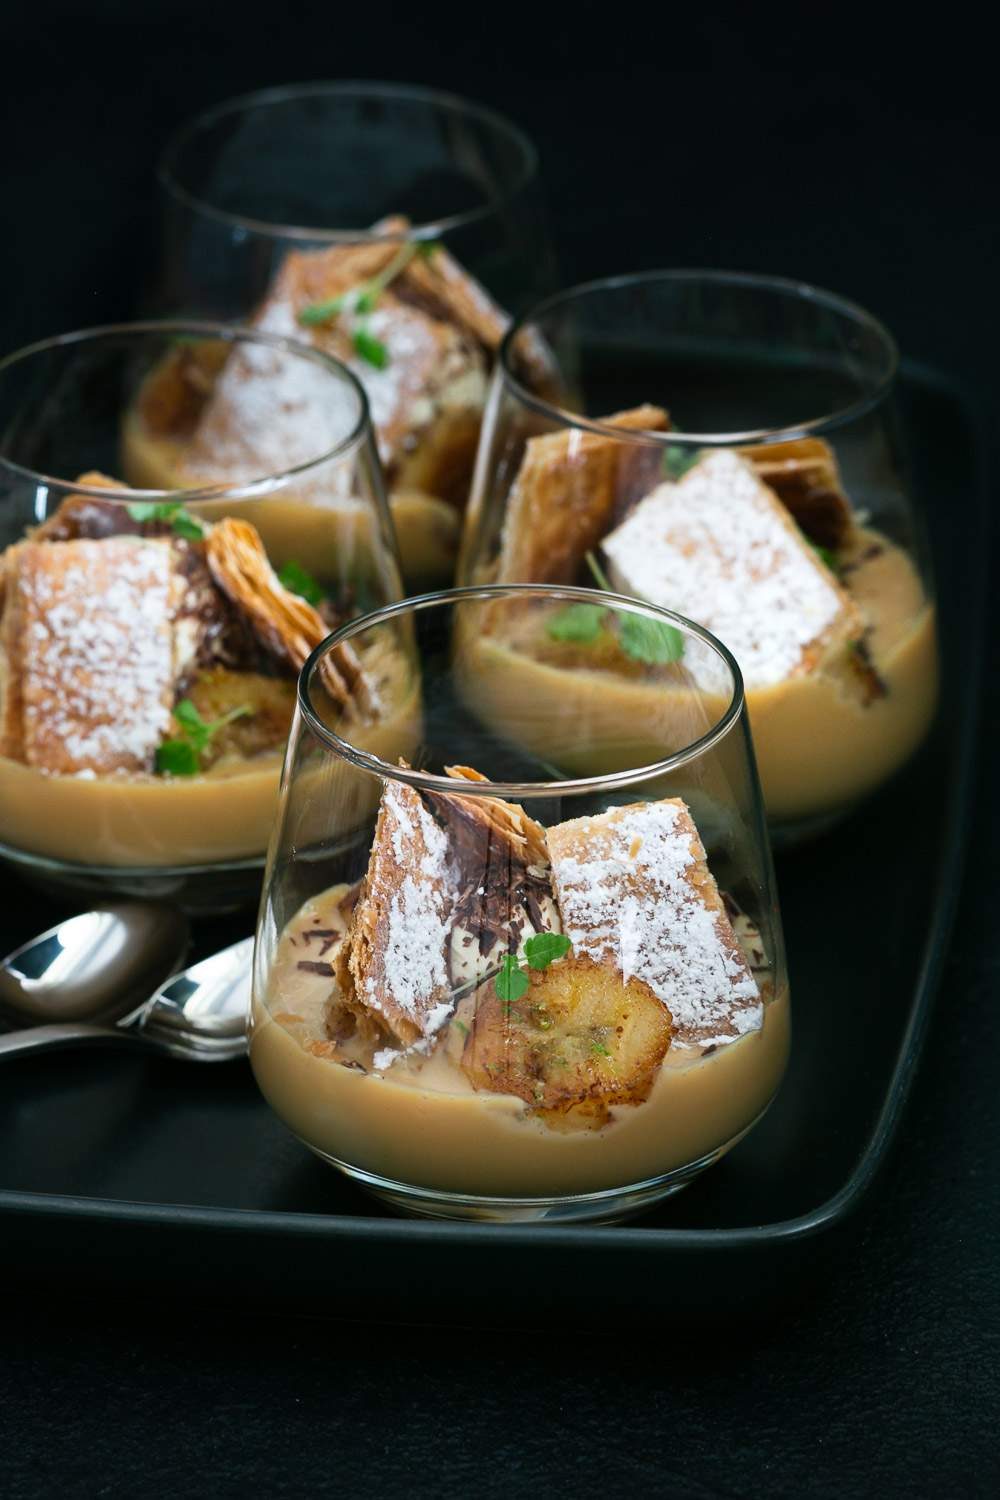 Dulce De Leche with banana and cream